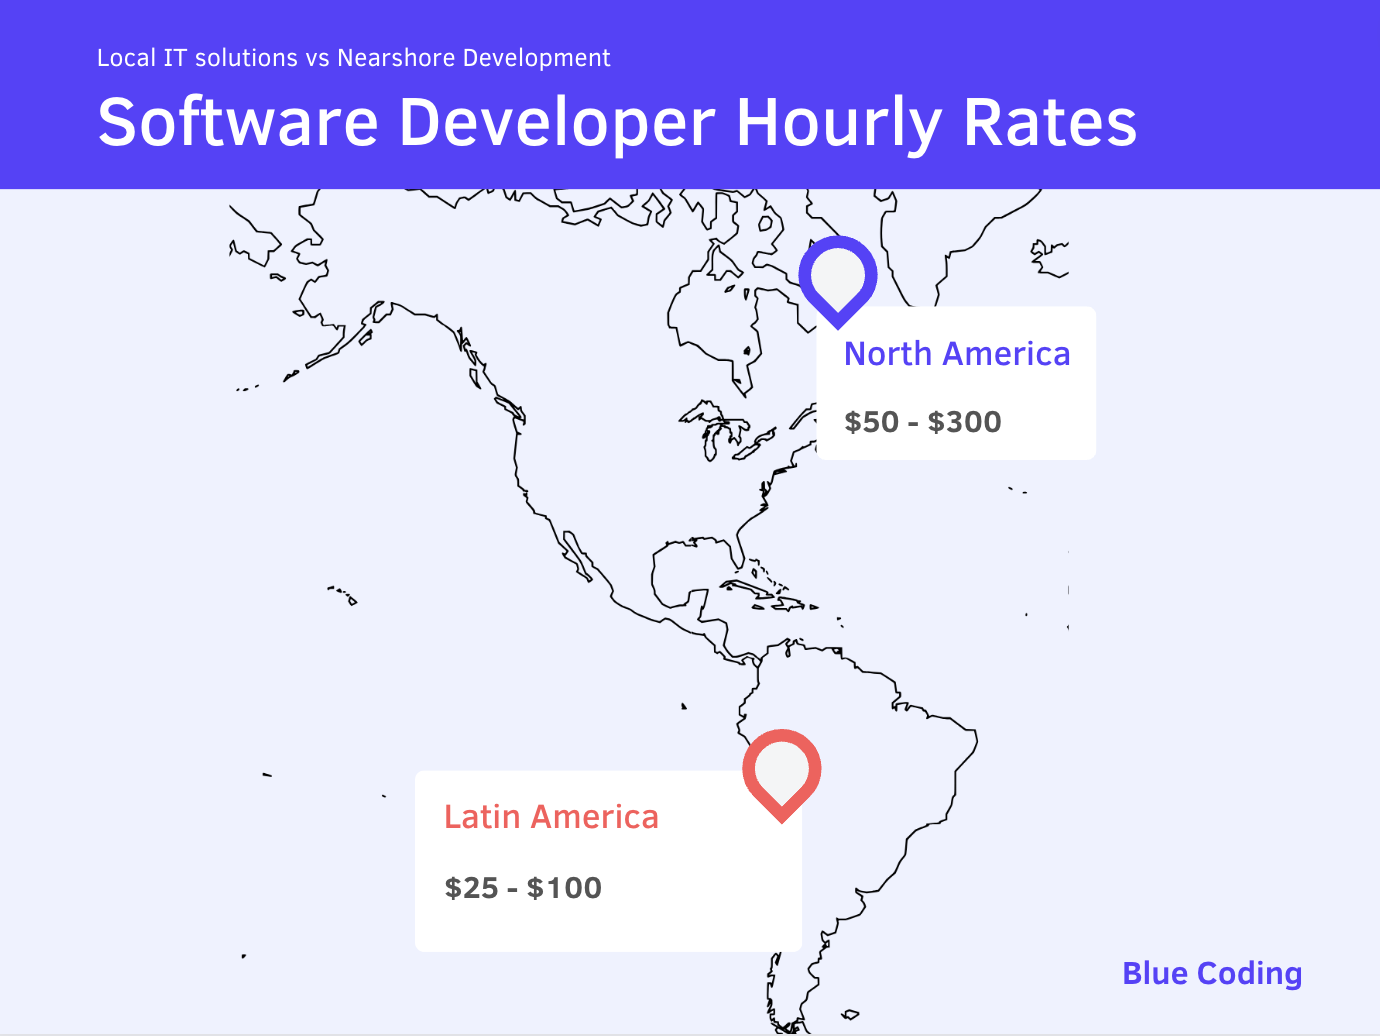 graphic showing the difference between software developer hourly rates when hiring LATAM devs and local IT solutions in North America